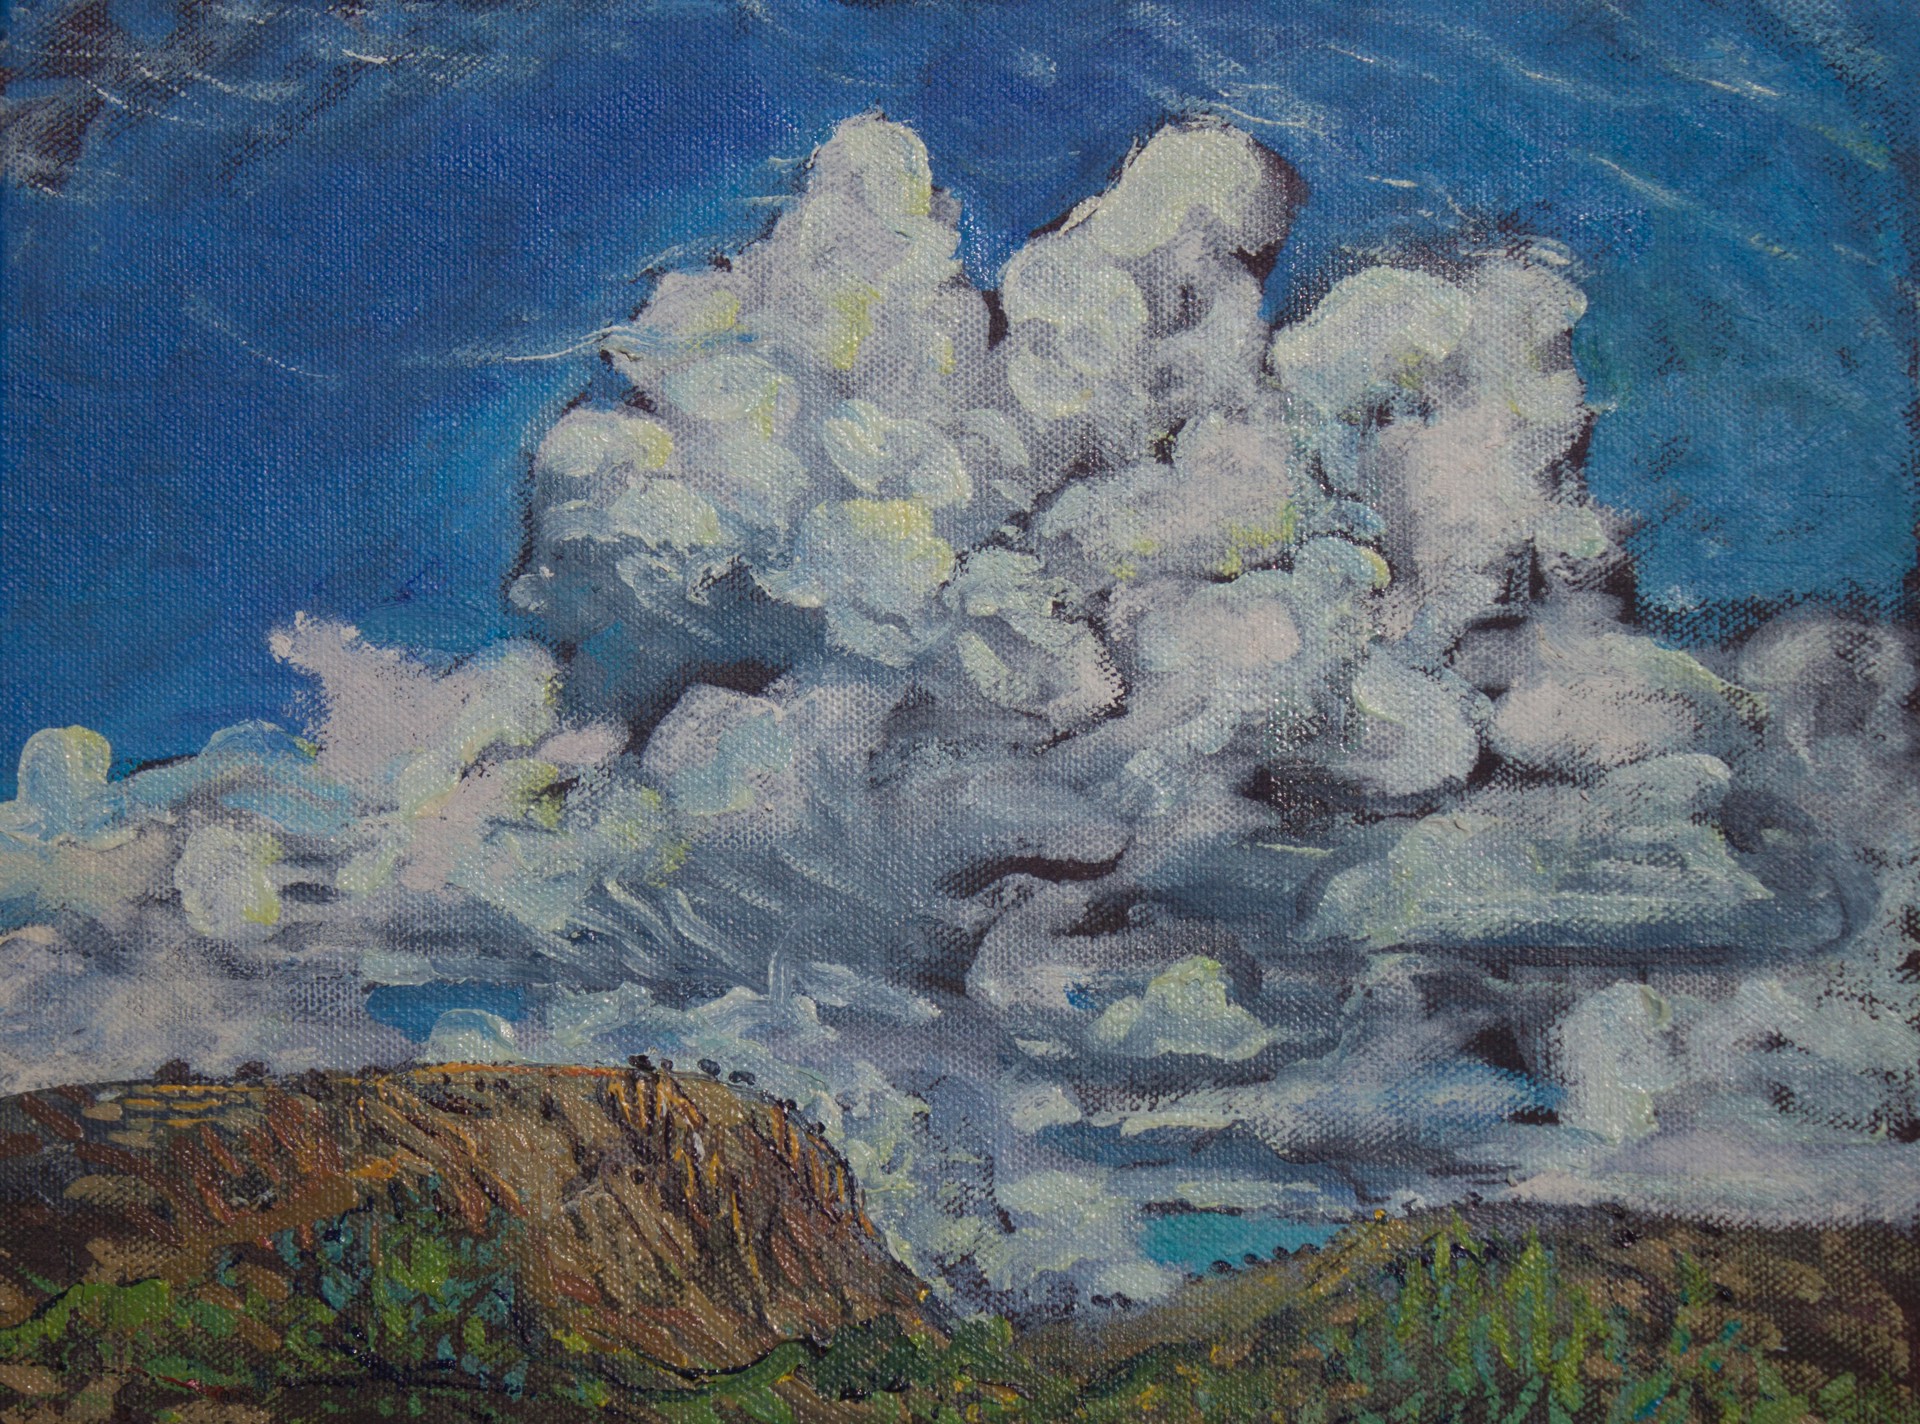 Thunderheads by Charlie Meckel